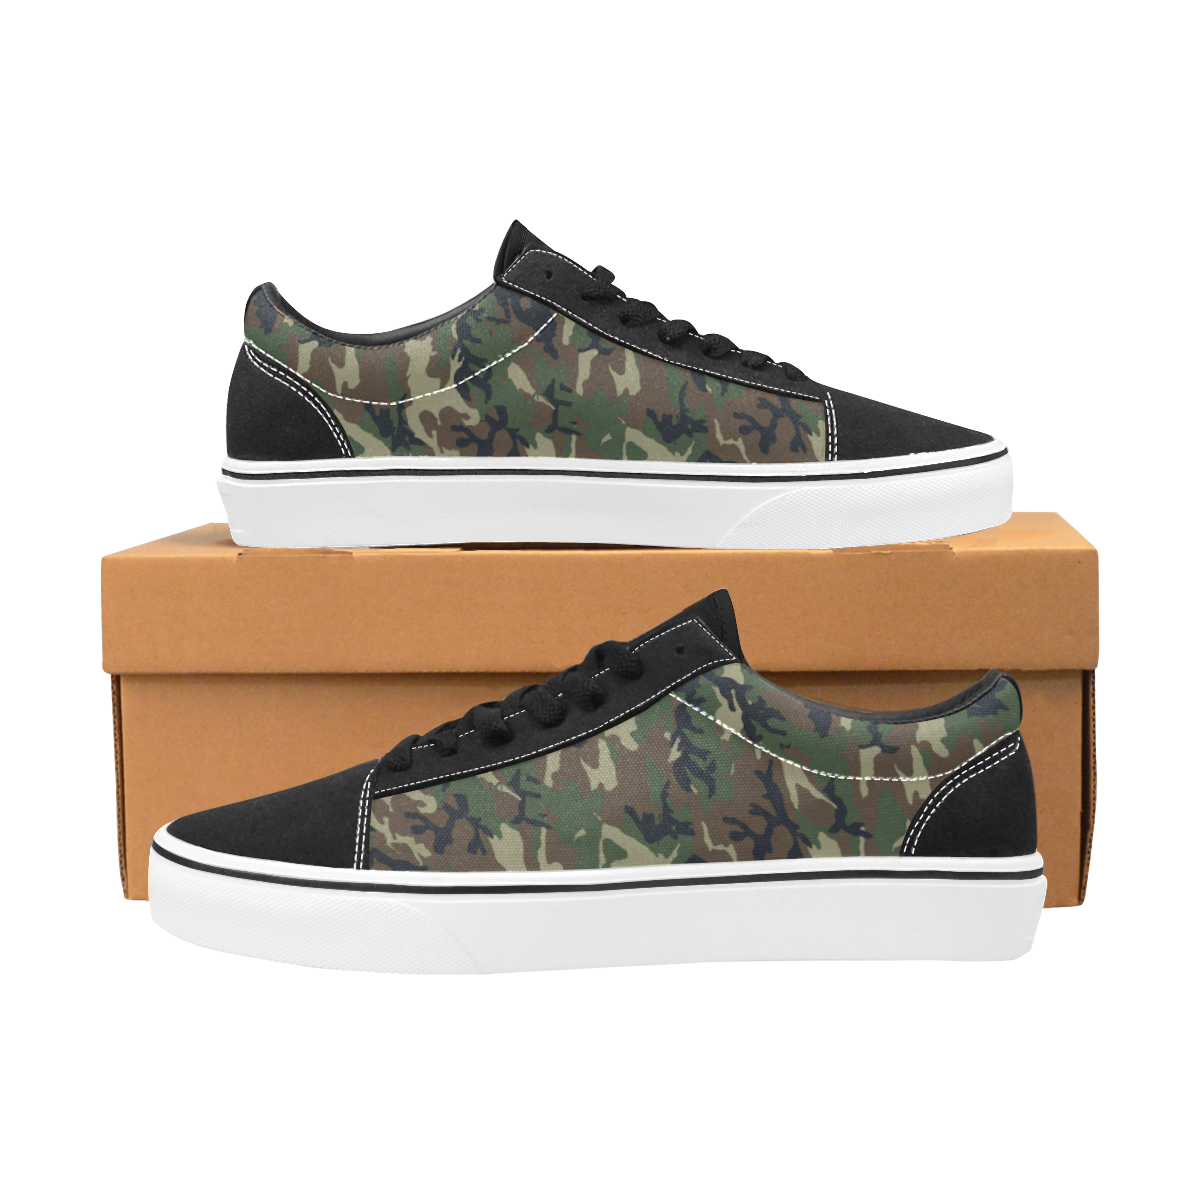 Woodland Forest Green Camouflage Women's Low Top Skateboarding Shoes/Large (Model E001-2)